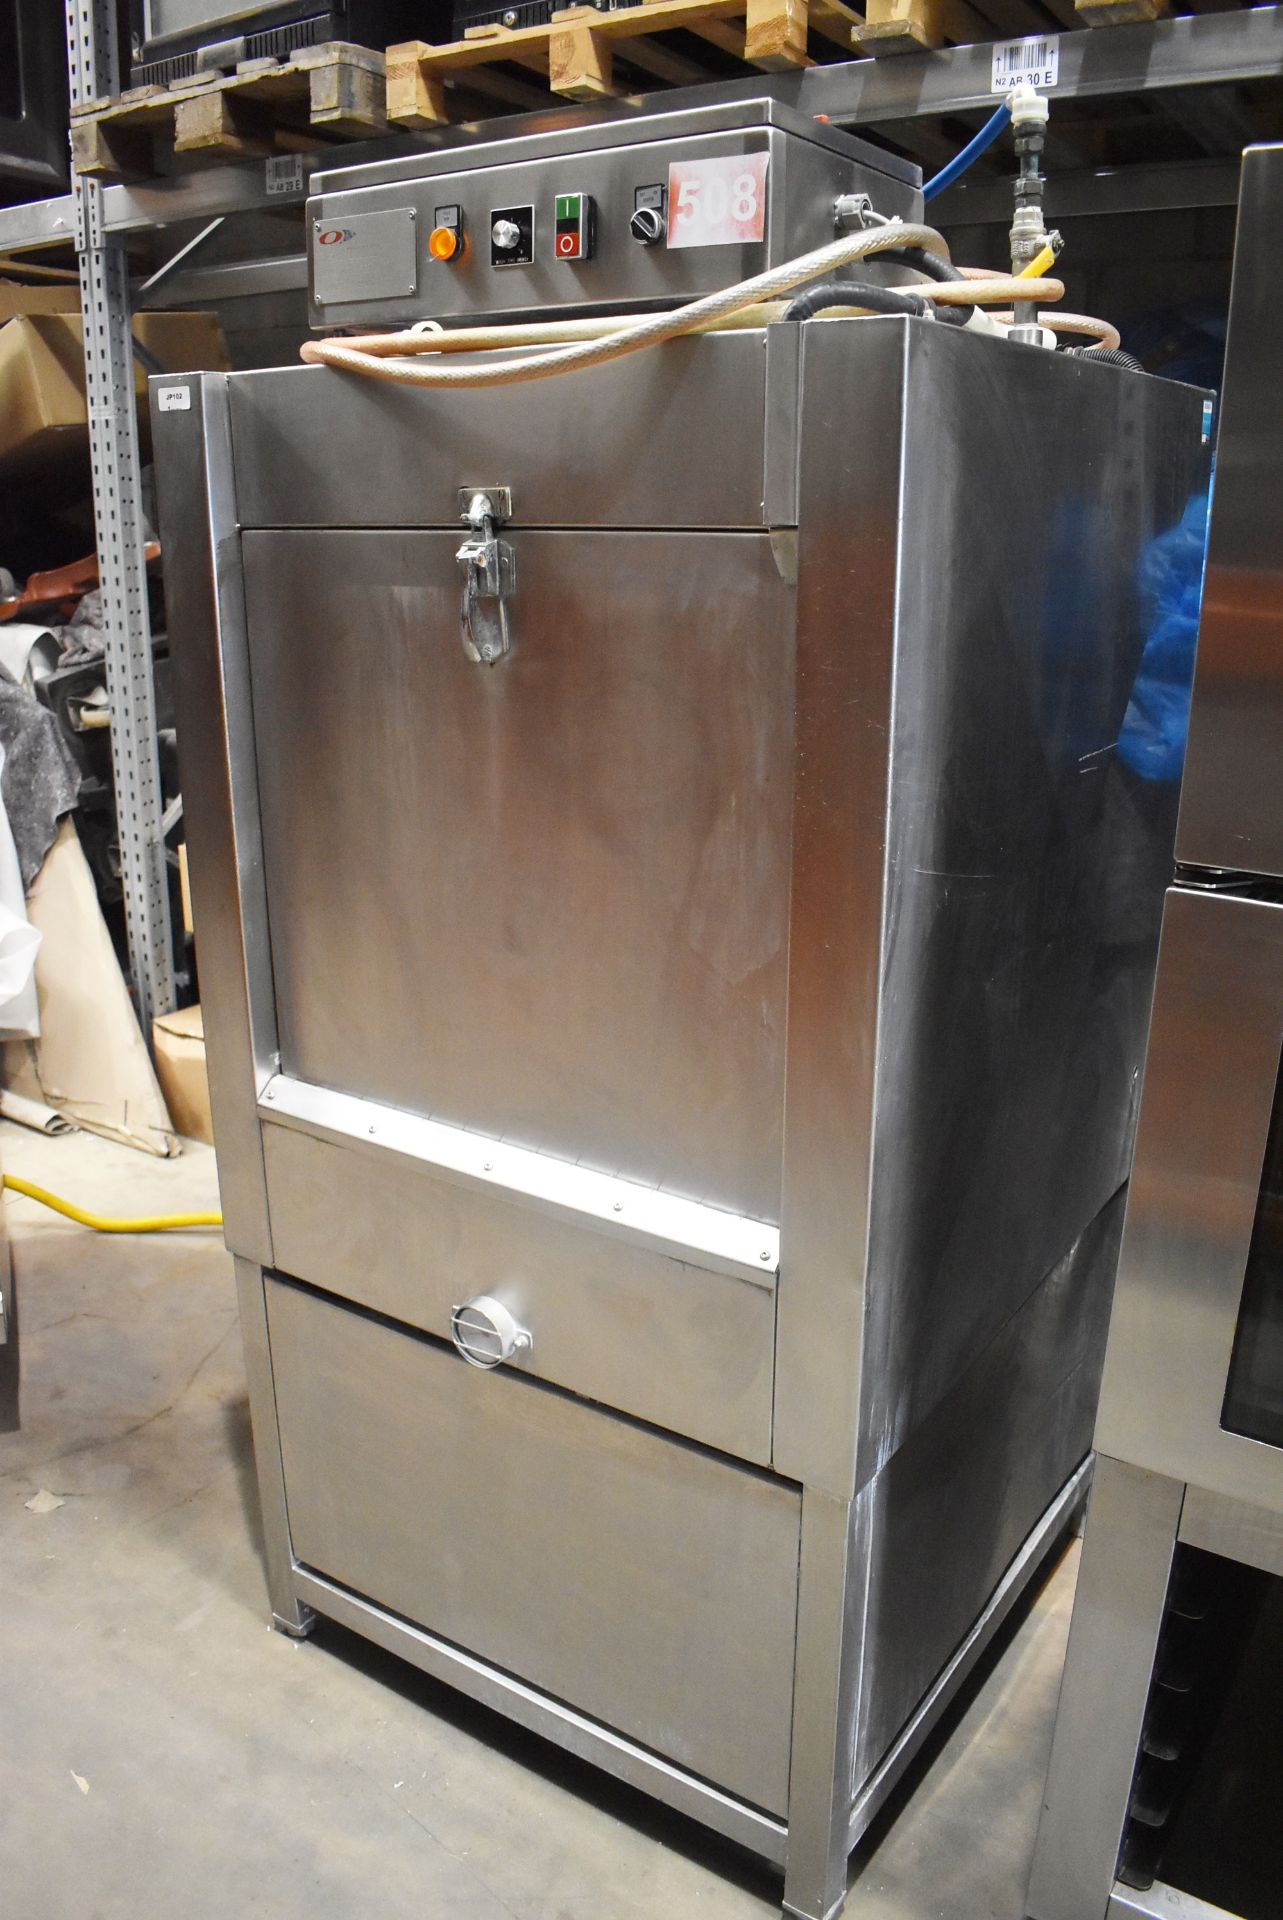 1 x Oliver Douglas Panamatic 500 Industrial Washing Machine For Commercial Kitchen Environments - St - Image 6 of 15